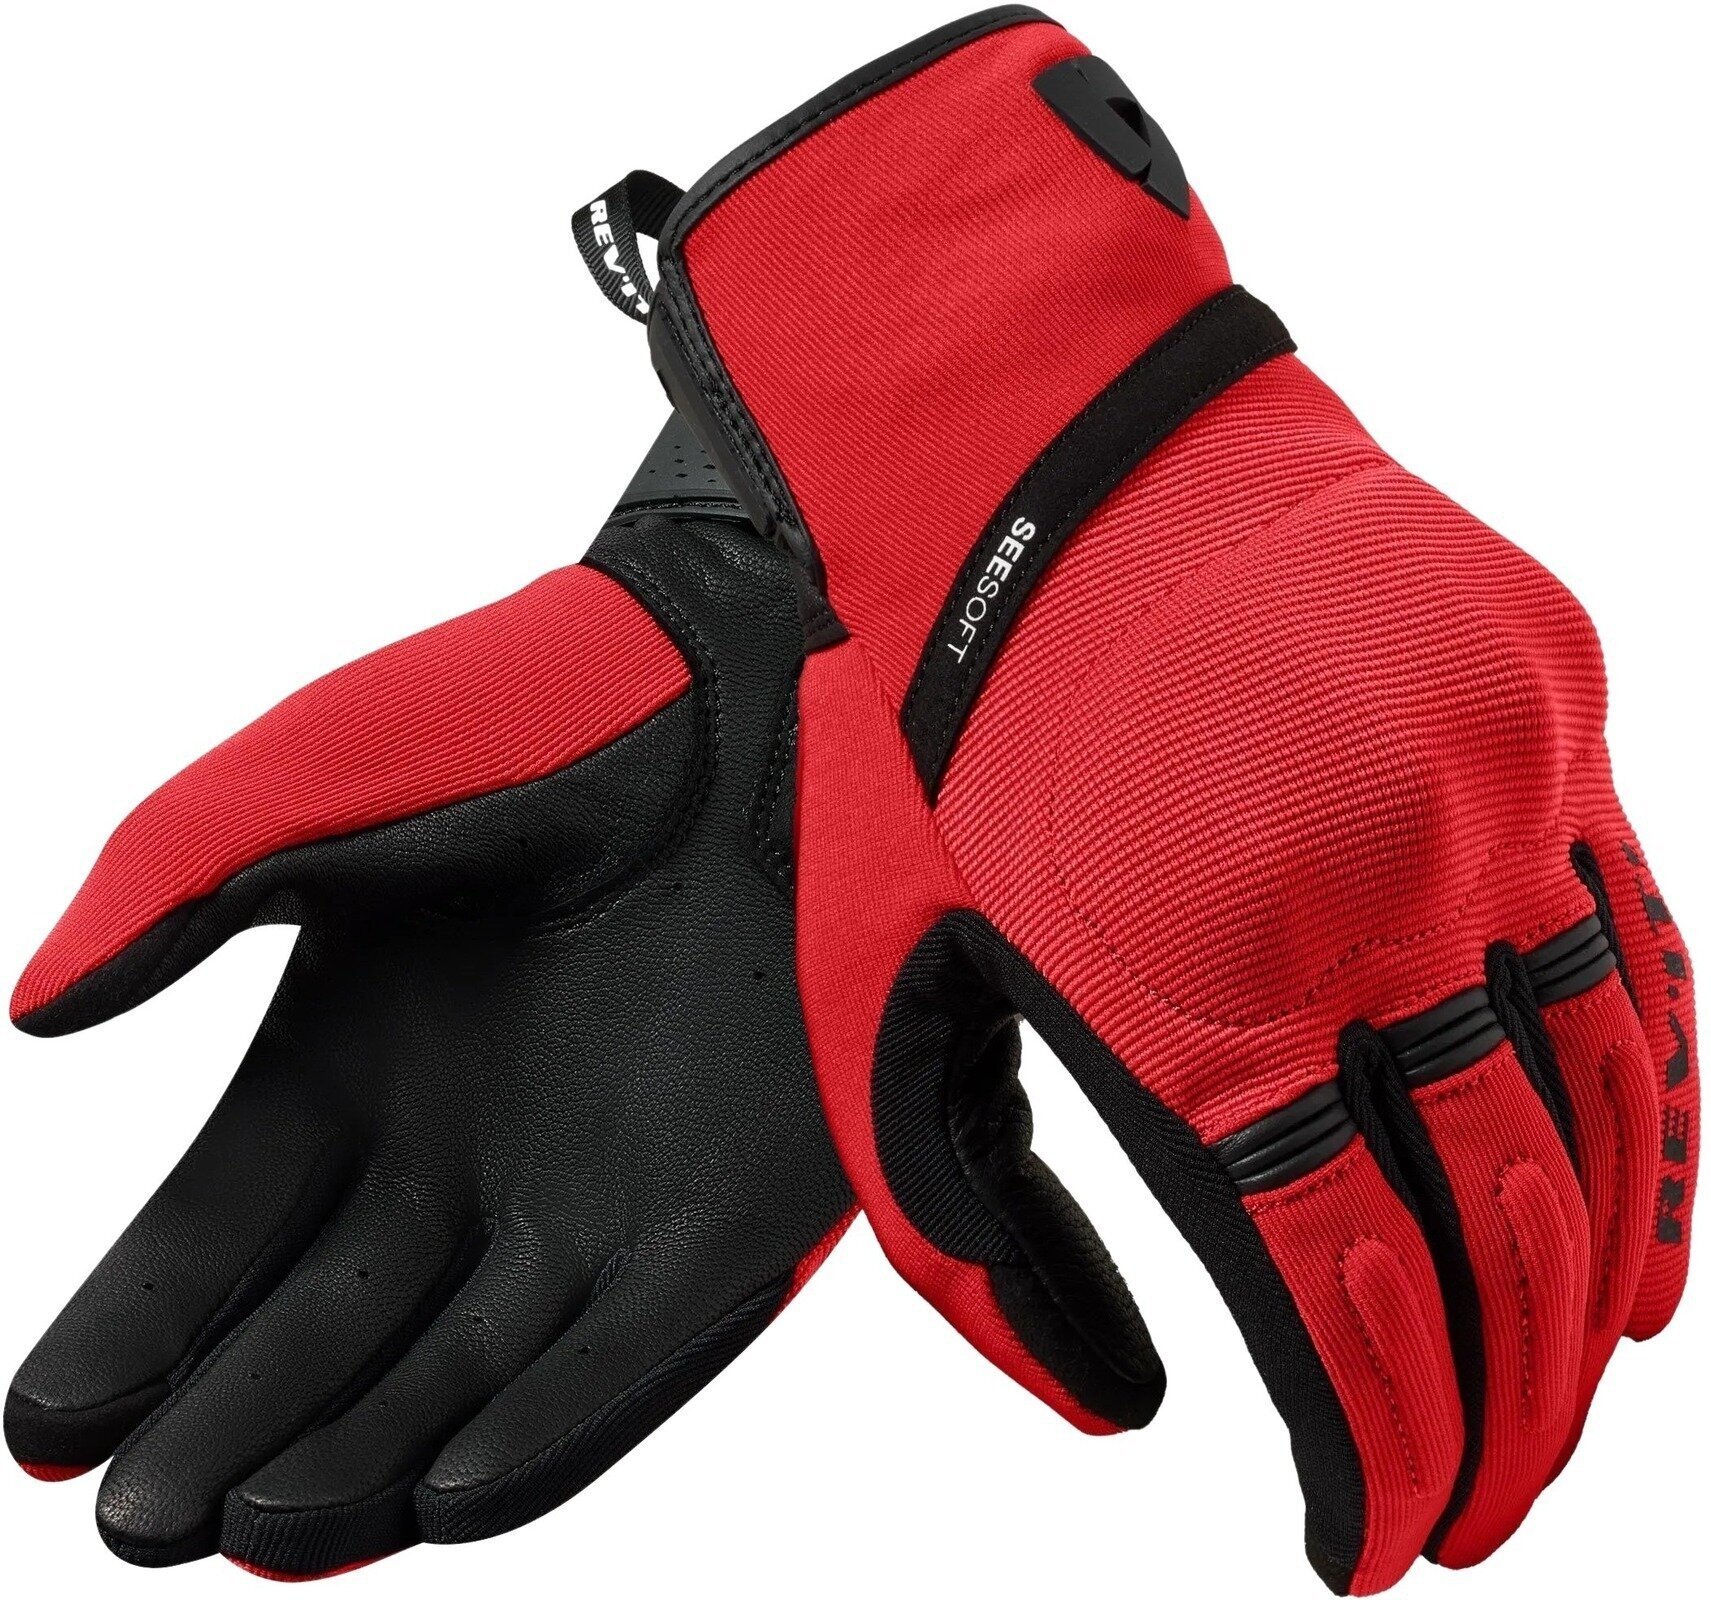 Motorcycle Gloves Rev'it! Gloves Mosca 2 Red/Black XL Motorcycle Gloves